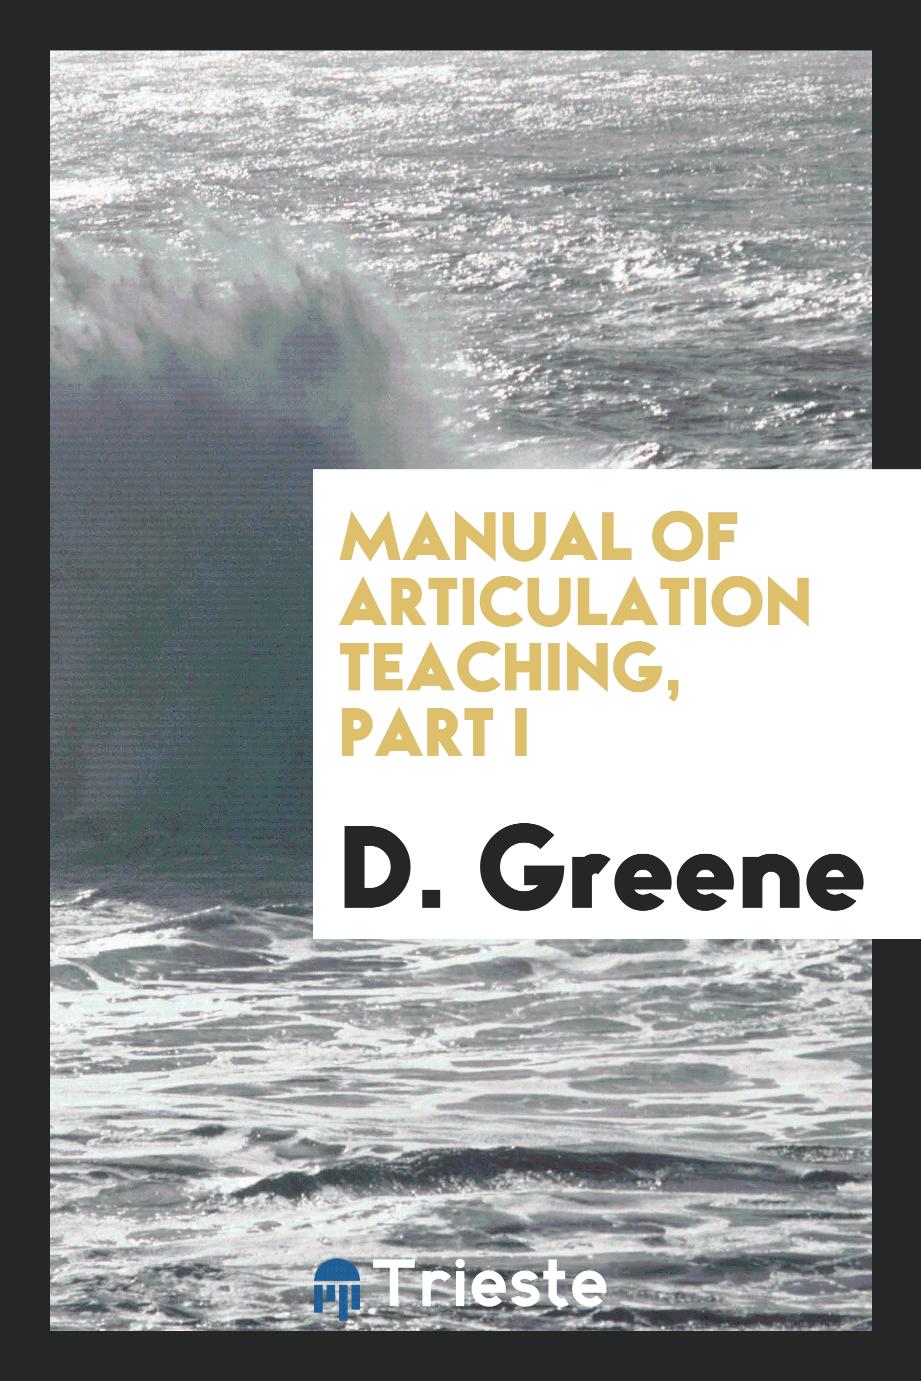 Manual of Articulation Teaching, Part I